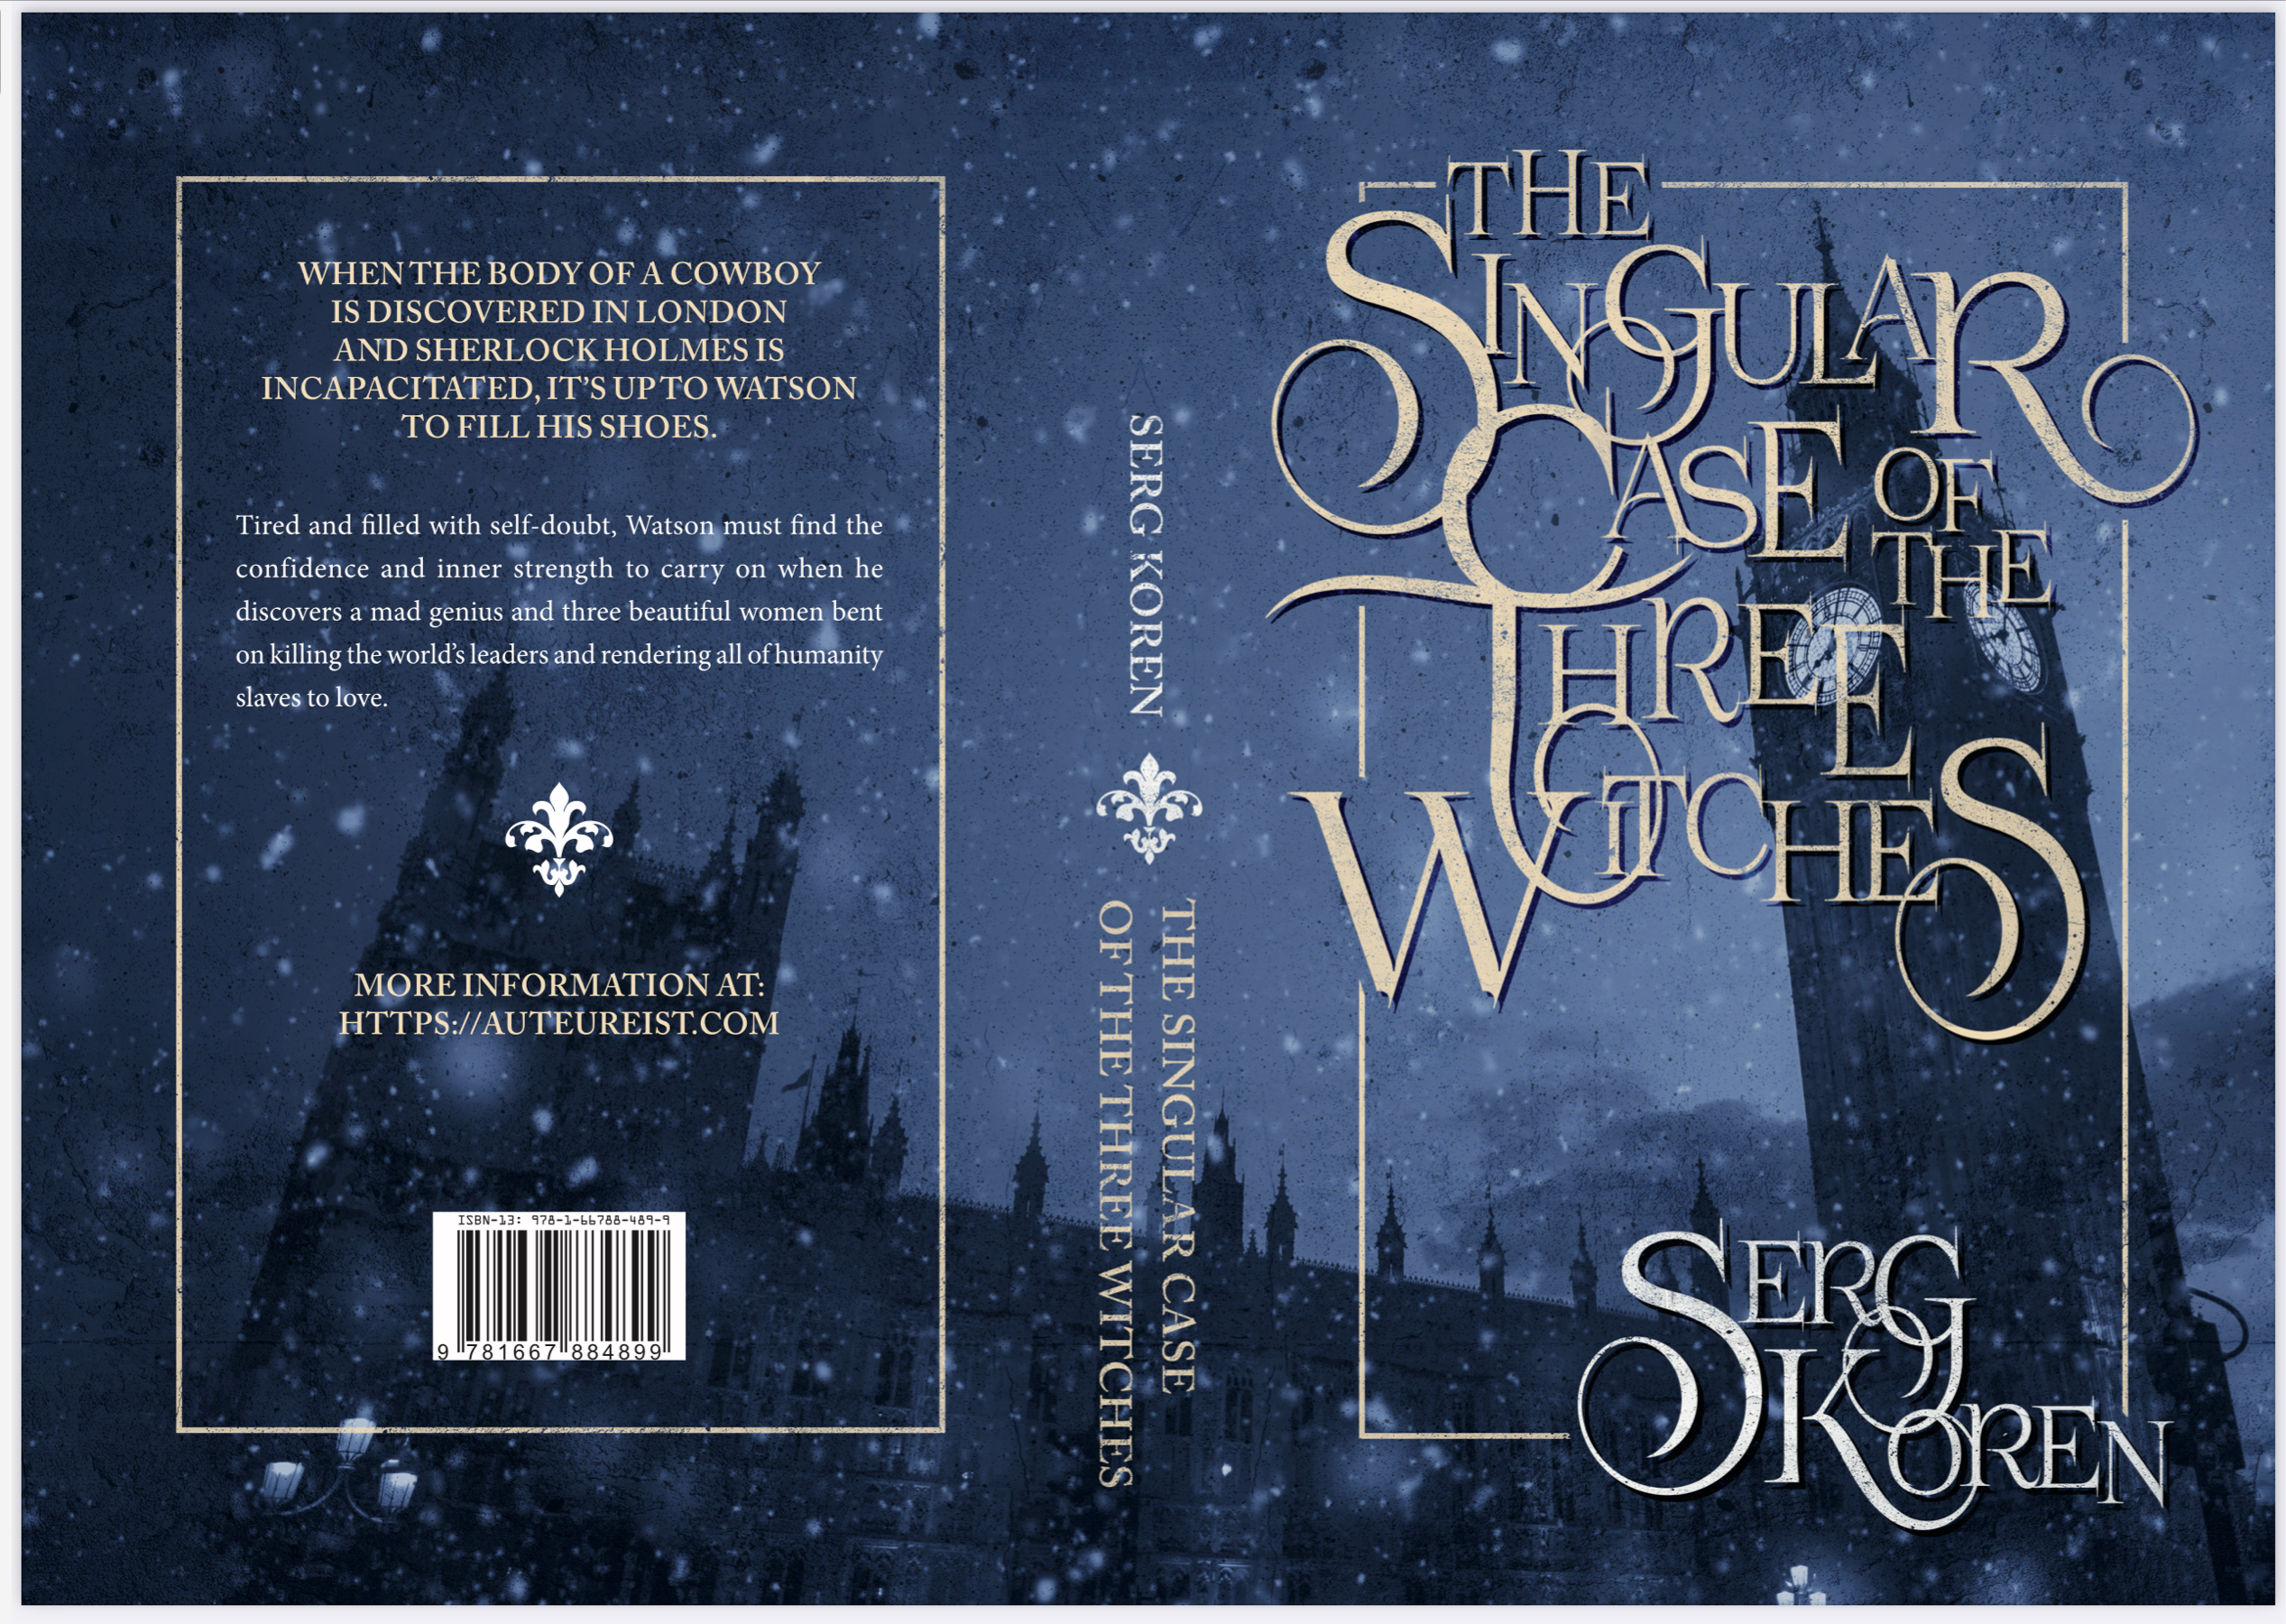 "The Singular Case of the Three Witches" cover.